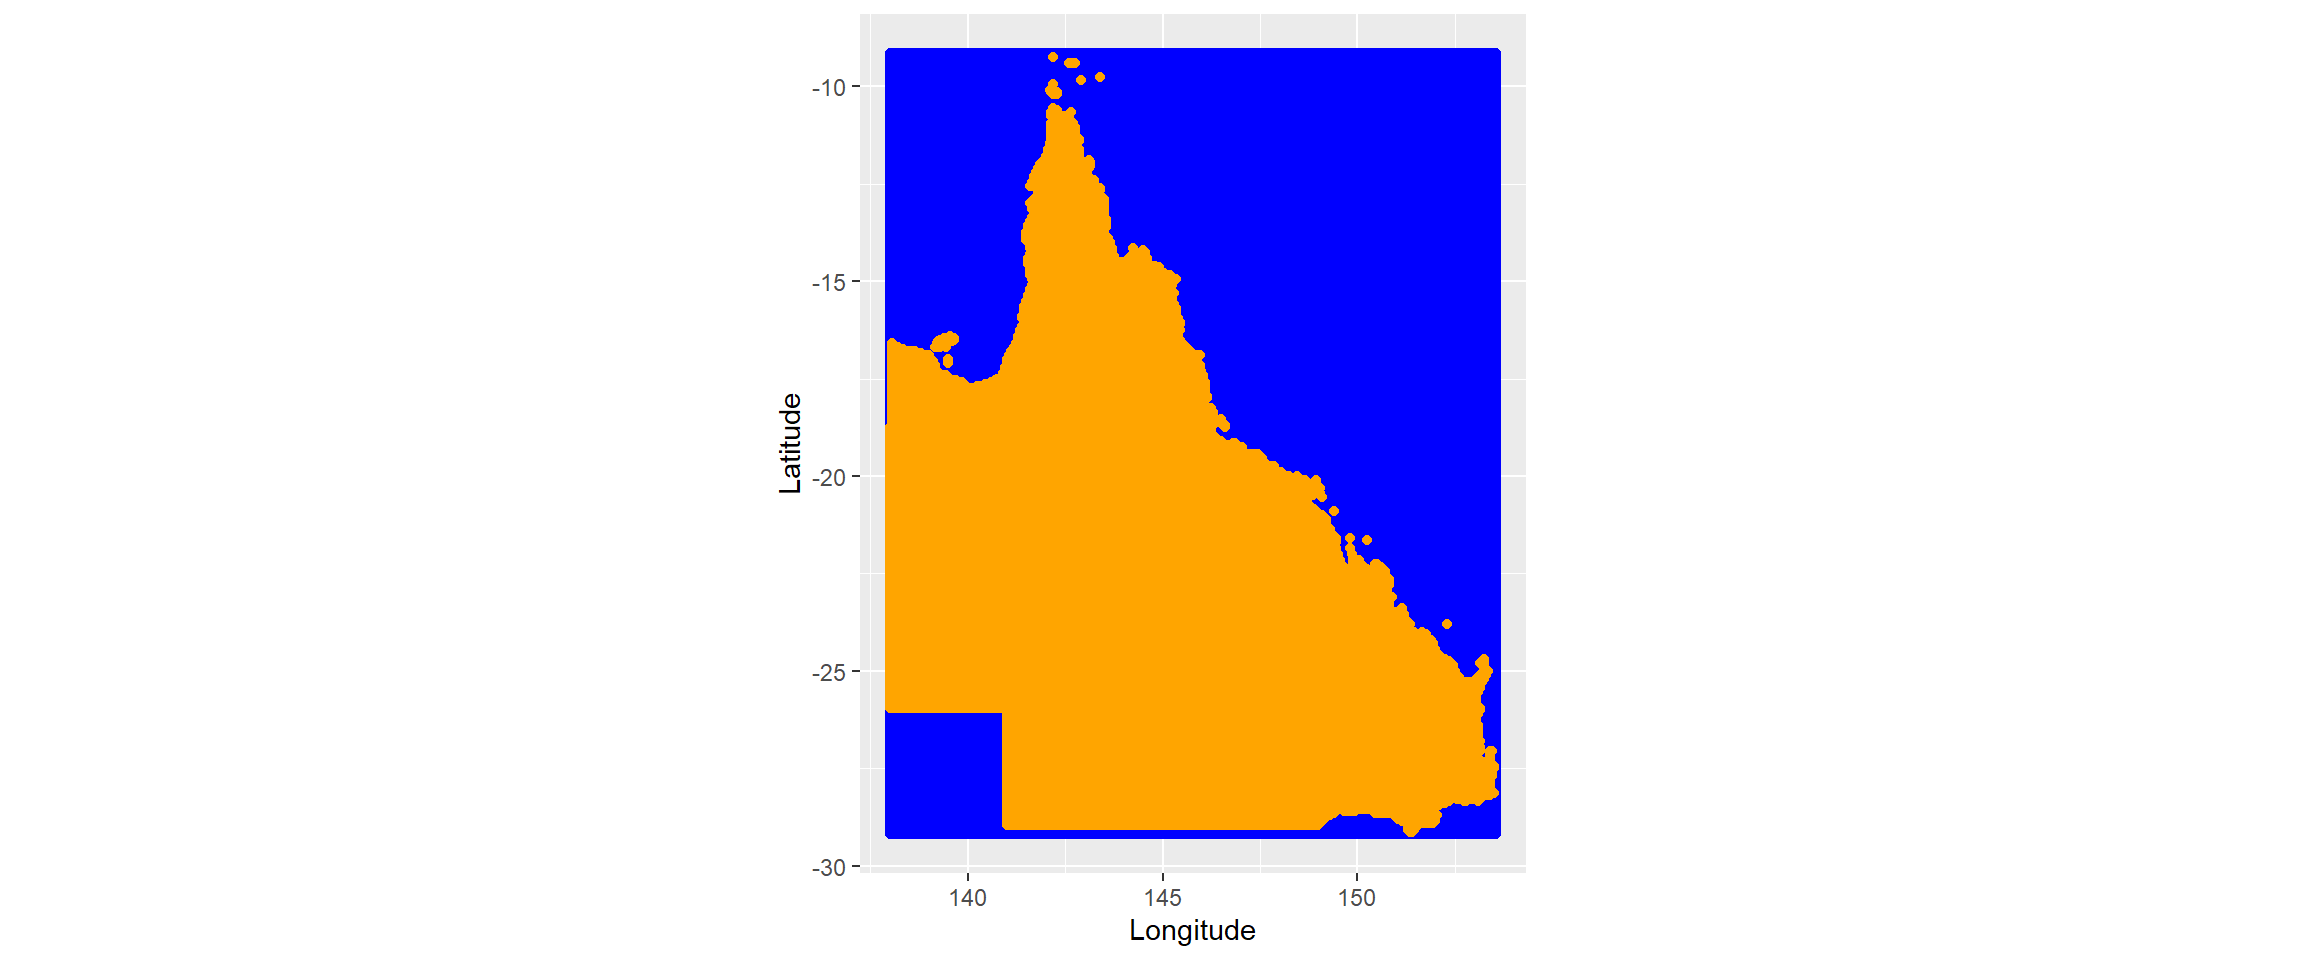 coordinates that we will use for kriging (initial grid in blue and those than intersect with QLD boundary in orange)